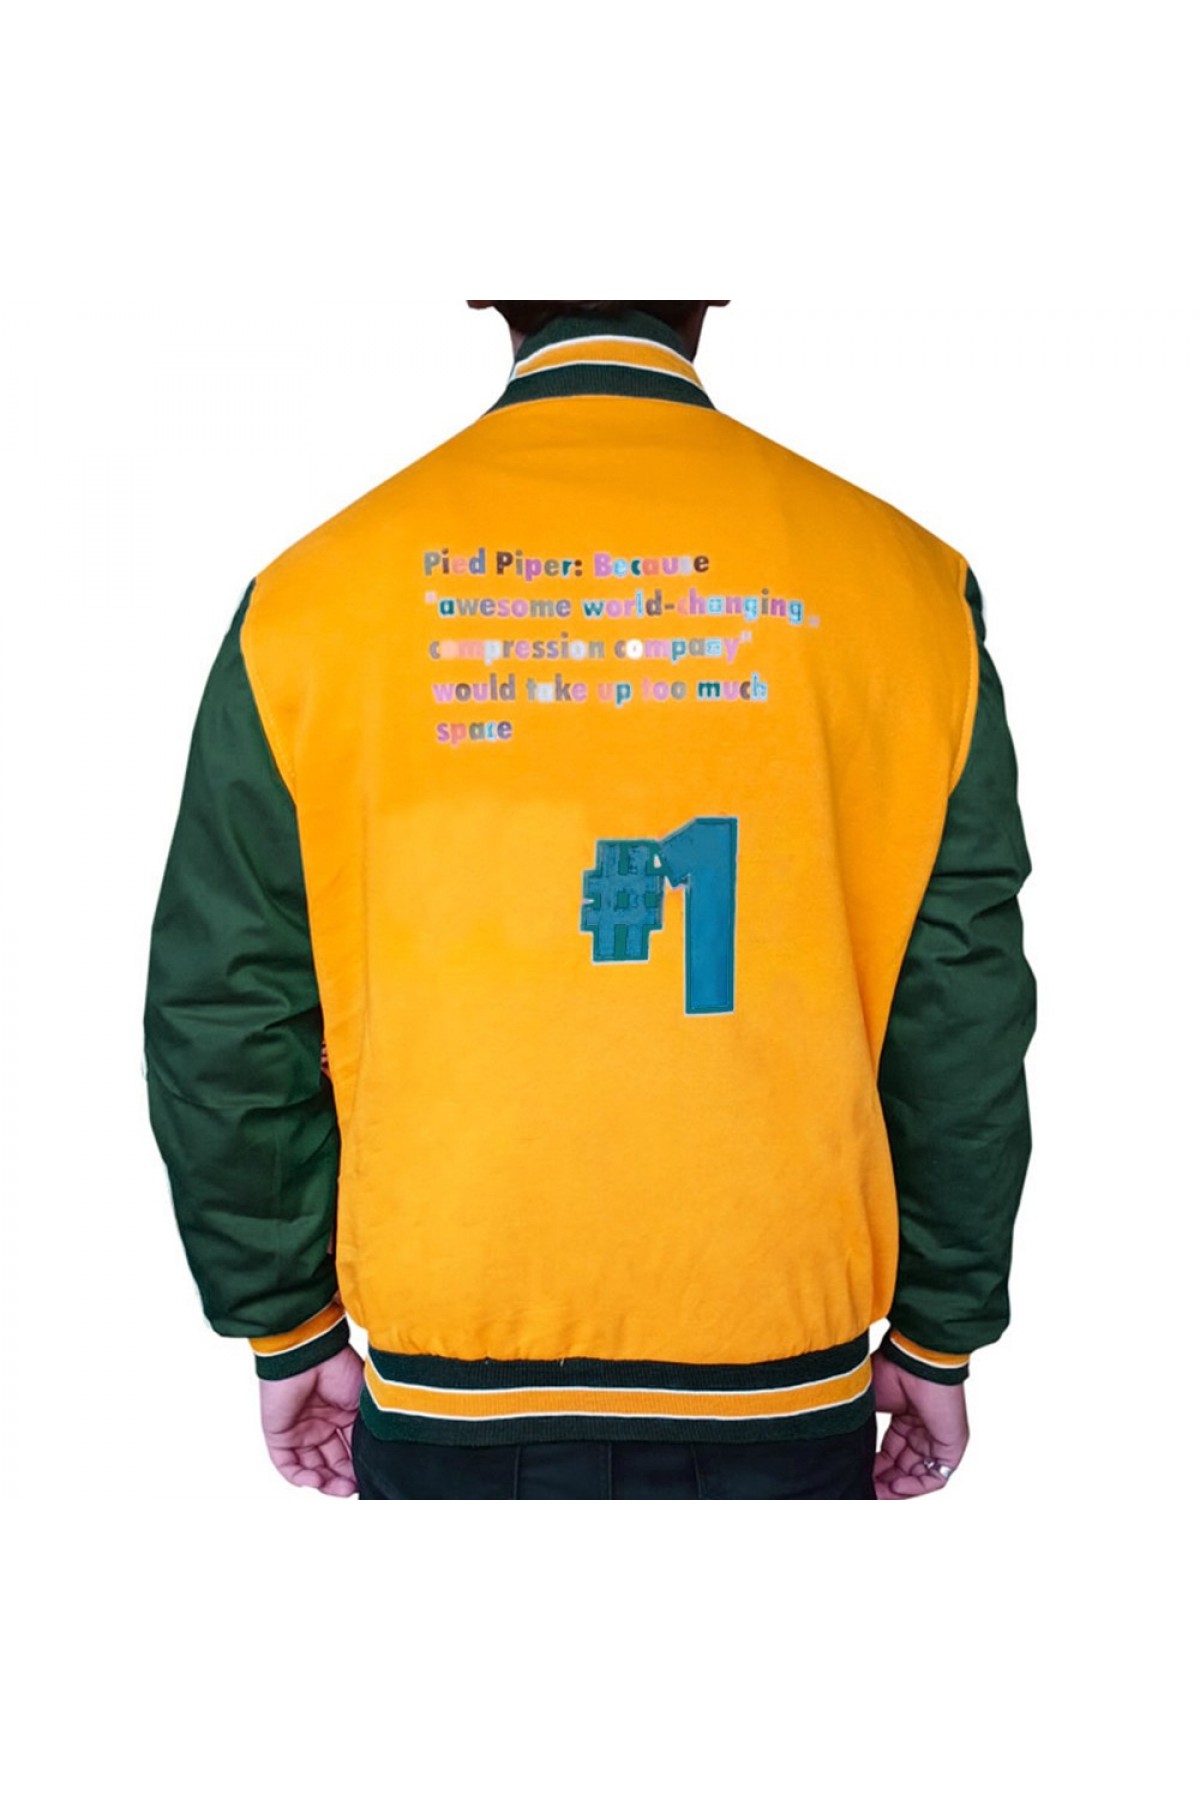 Silicon Valley Pied Piper Jared Dunn Jacket